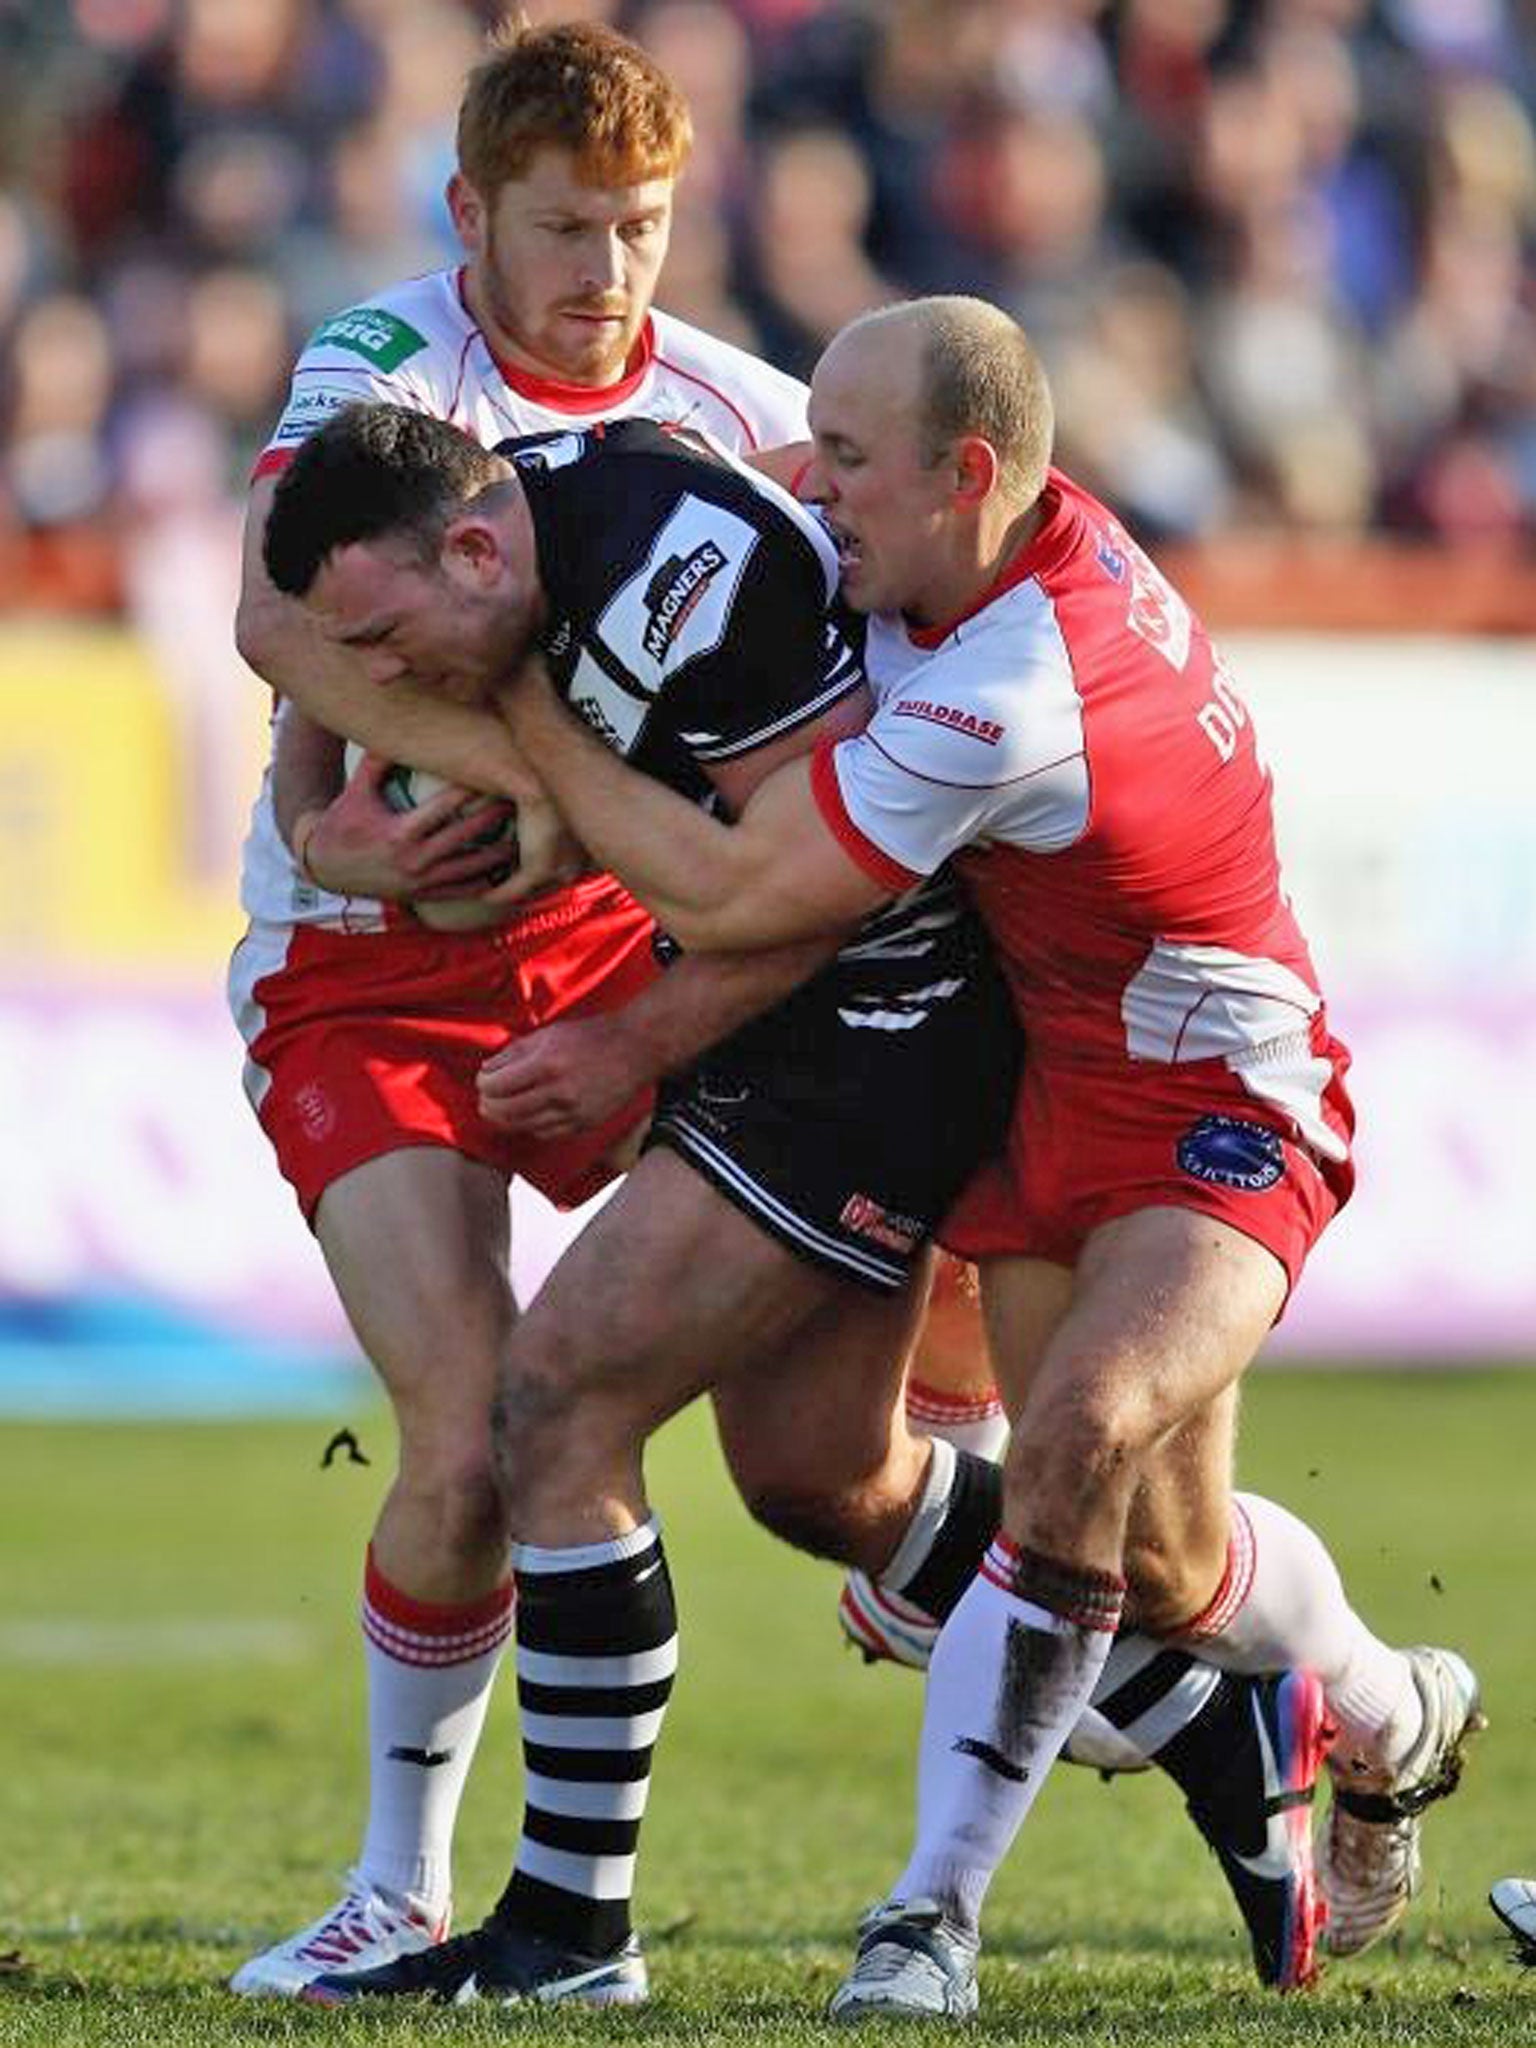 Stefan Marsh, of Widnes, is tackled by Hull KR’s Michael Dobson and Kris Welham